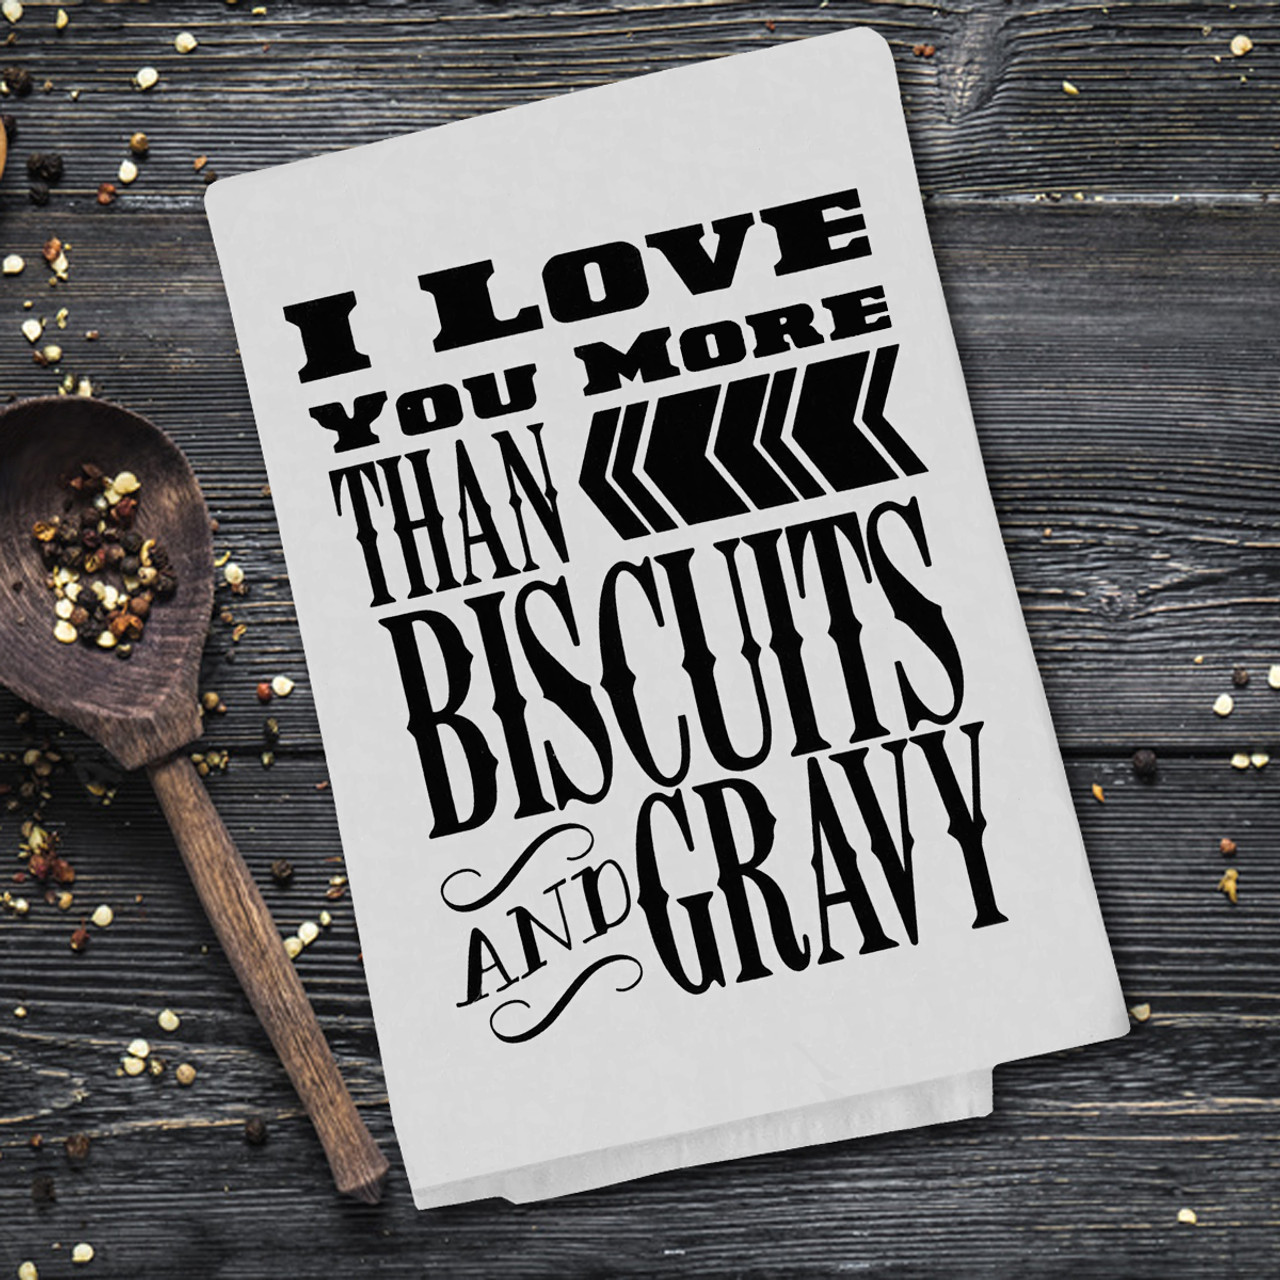 https://cdn11.bigcommerce.com/s-qlw1zct7w/images/stencil/1280x1280/products/2878/11762/Biscuits_and_Gravy__35484.1673629558.jpg?c=2?imbypass=on